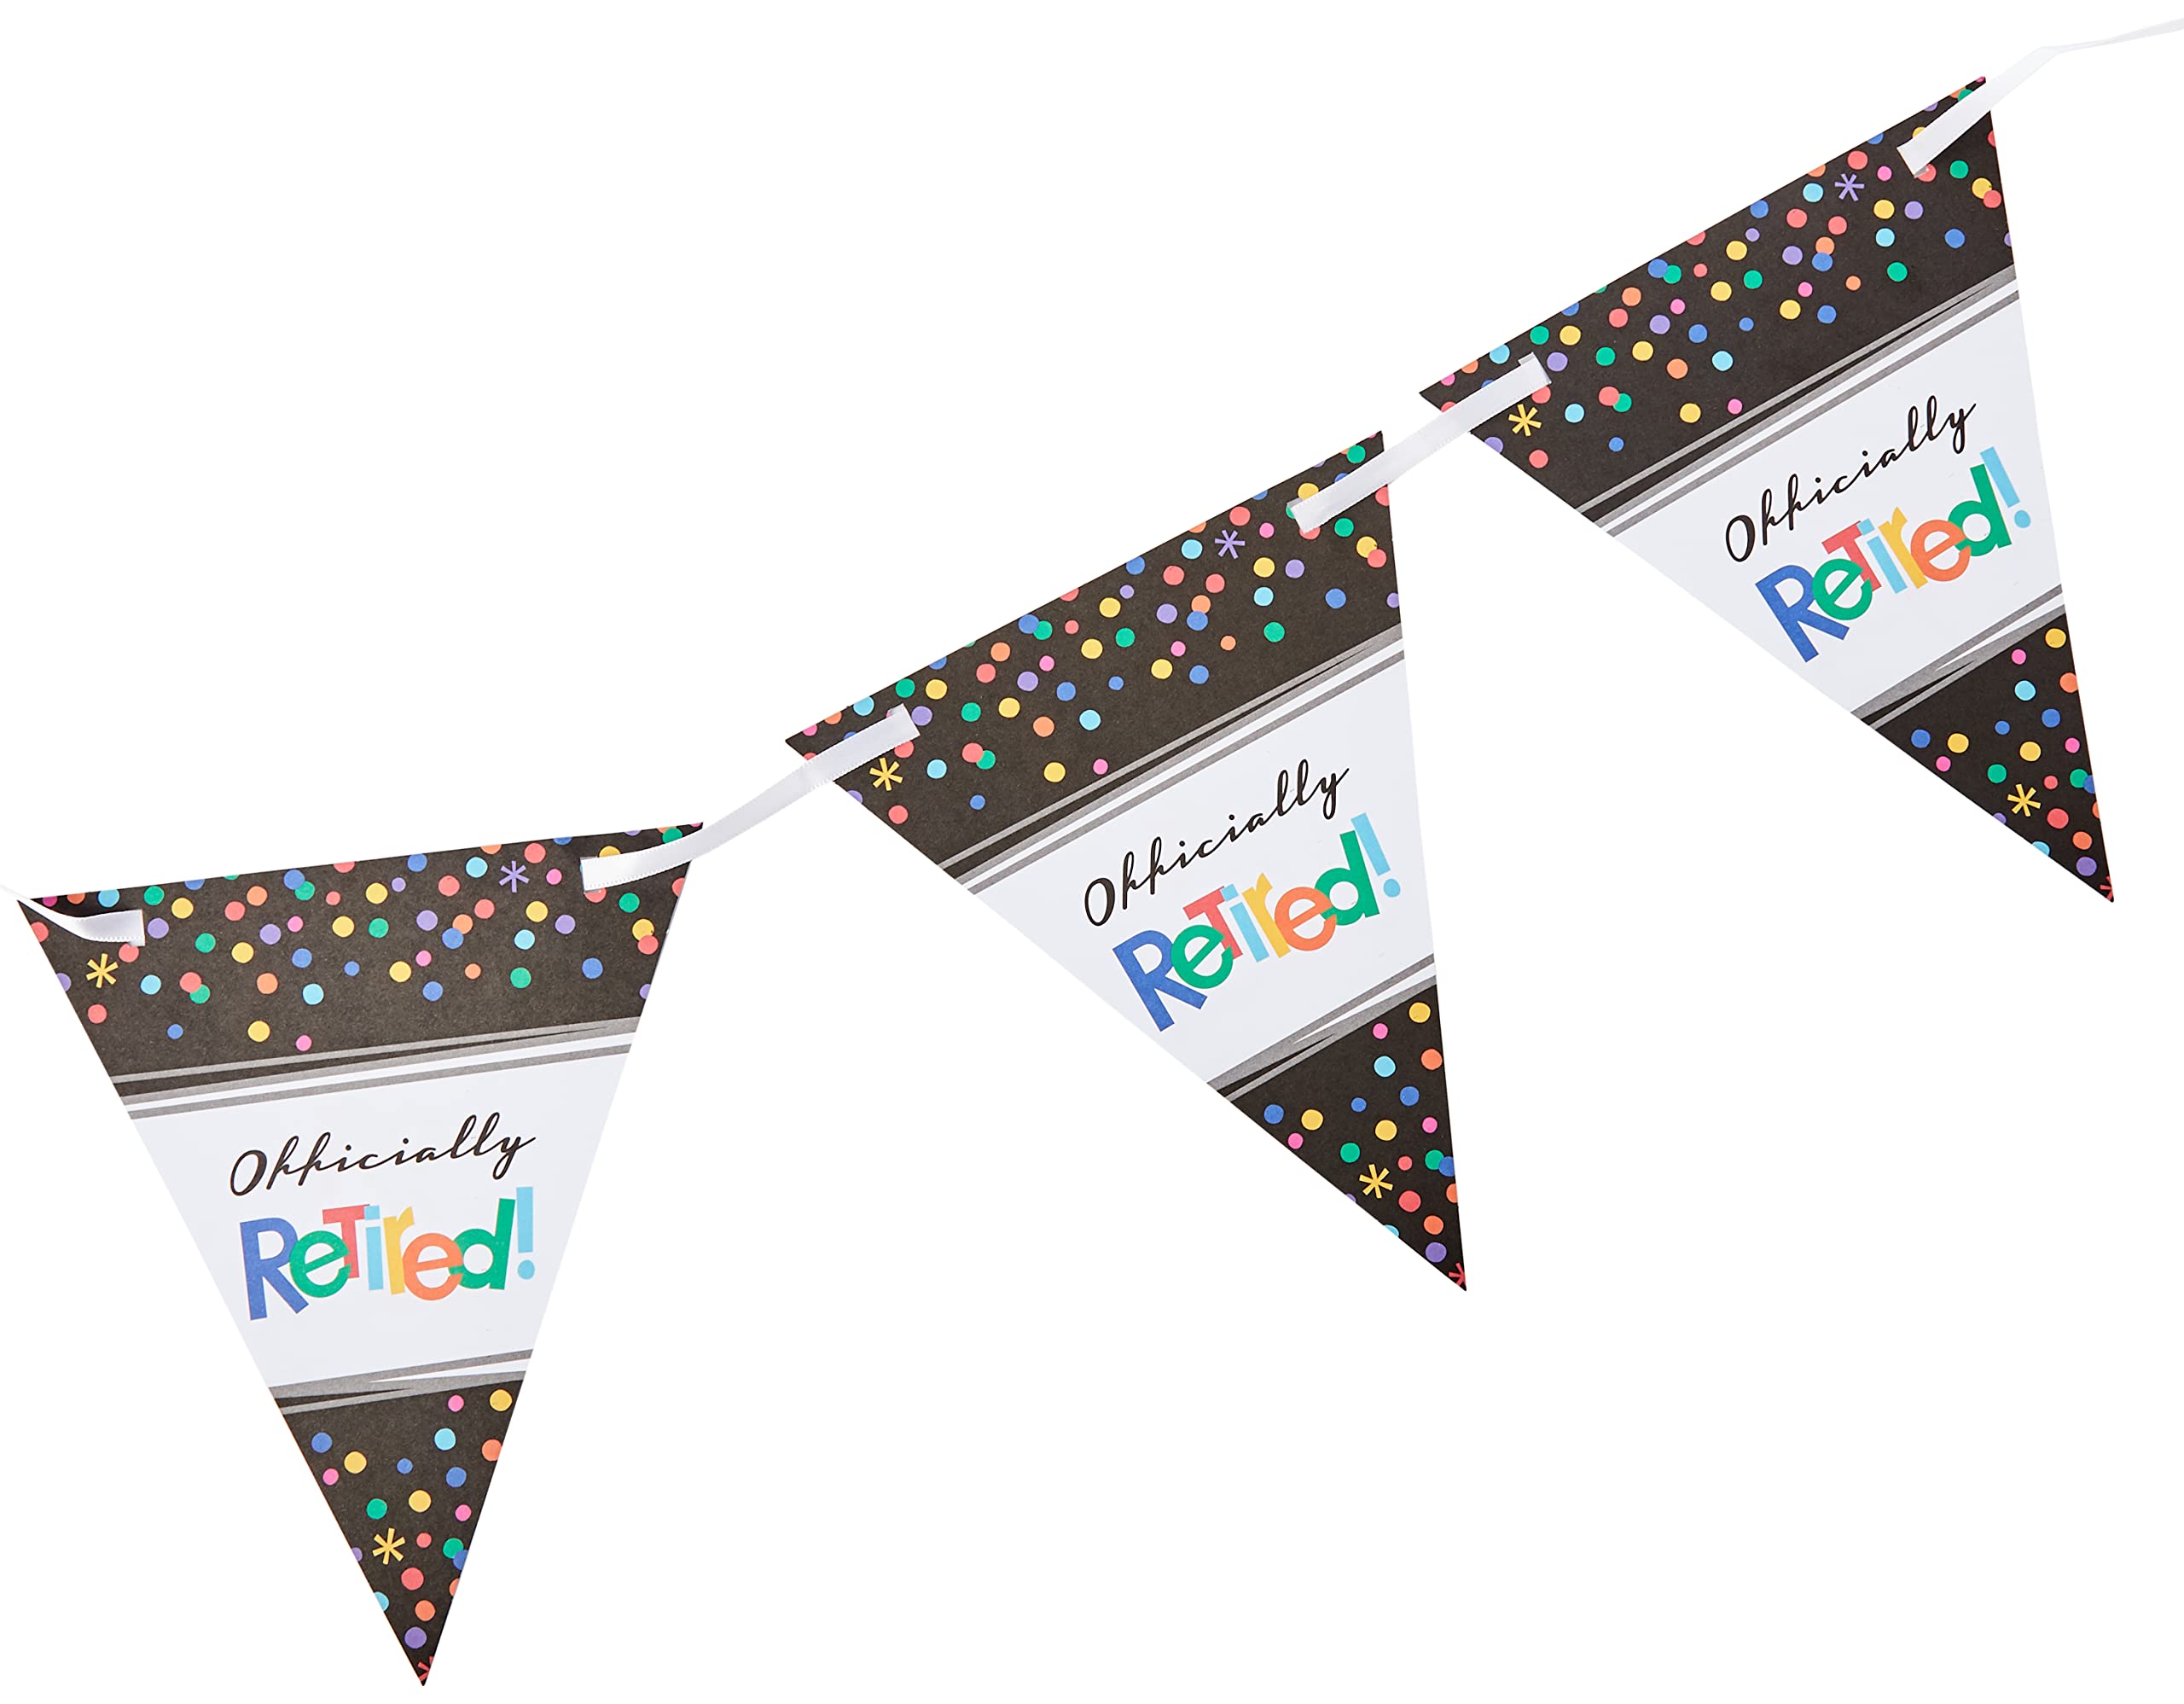 Officially Retired Multicolor Pennant Banner Set - 15 ft (Pack Of 1) - 24 Pennants & Ribbon Included - Perfect Celebration Decoration